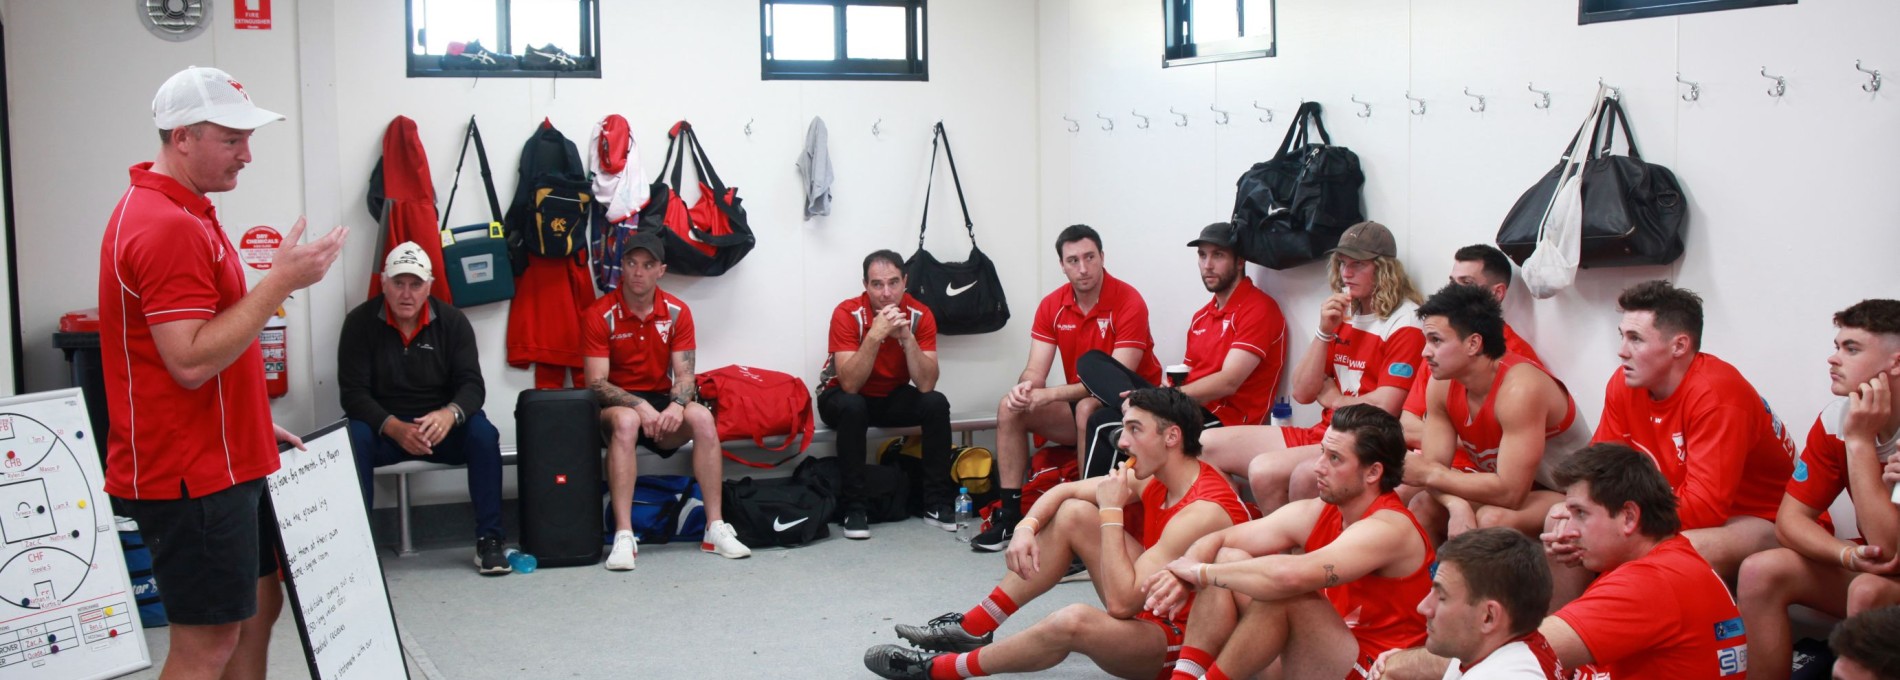 Male Sports Team Sitting in Changeroom with a Coach